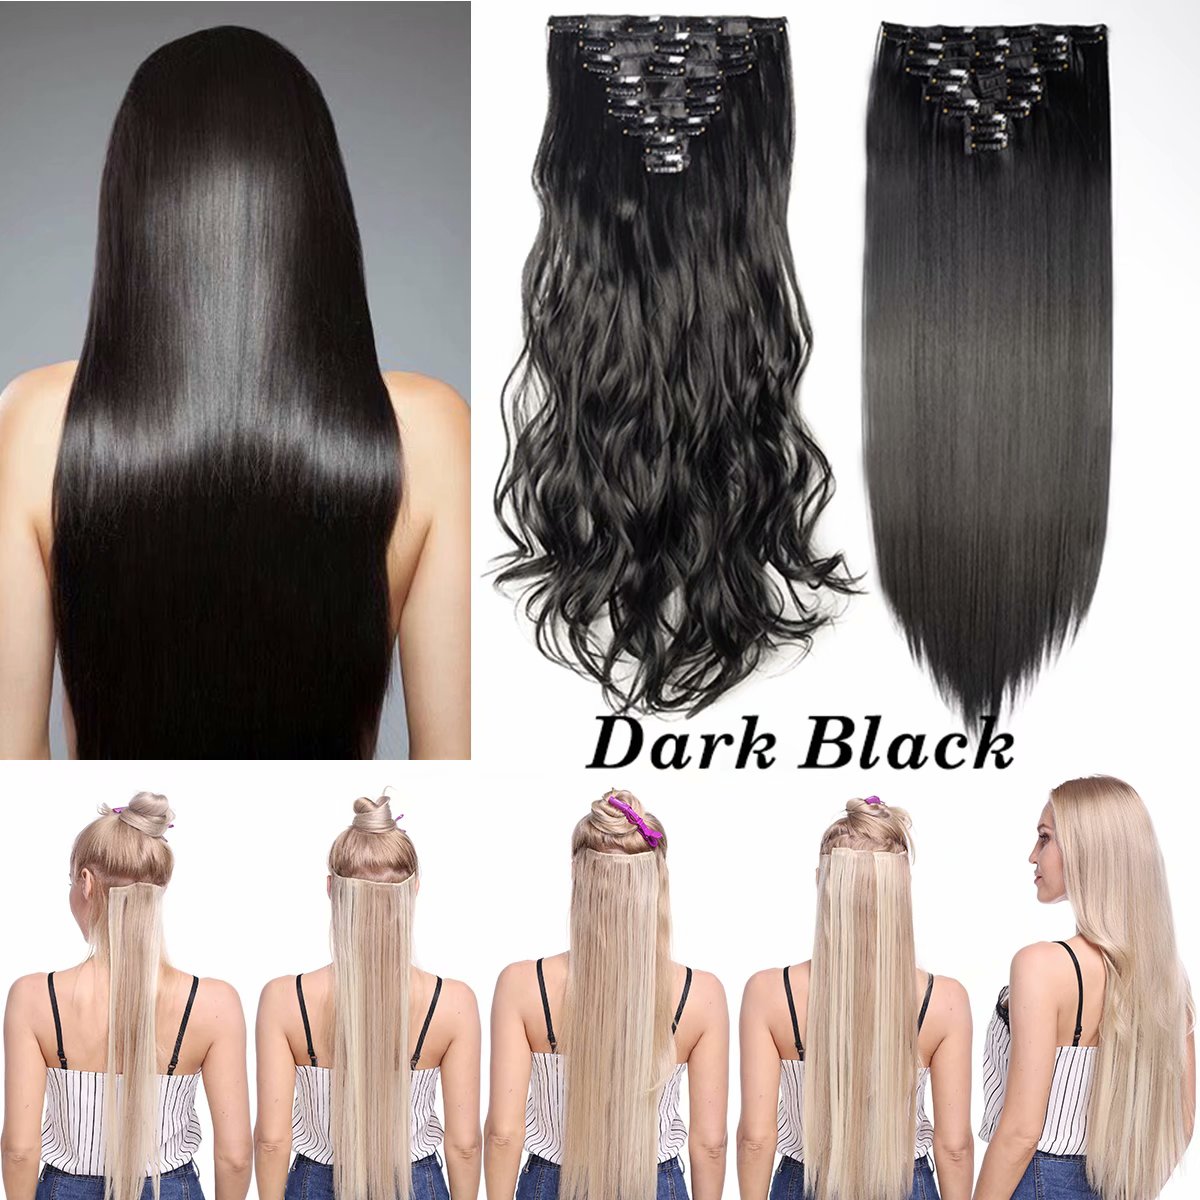 Benehair Clip in Hair Extensions Full Head Long Thick 8 Pieces Hair 18 Clips Curly Wavy Straight Hairpieces 100% Real Natural as Human Best Hair Set 24'' Curly Dark Black - image 3 of 11